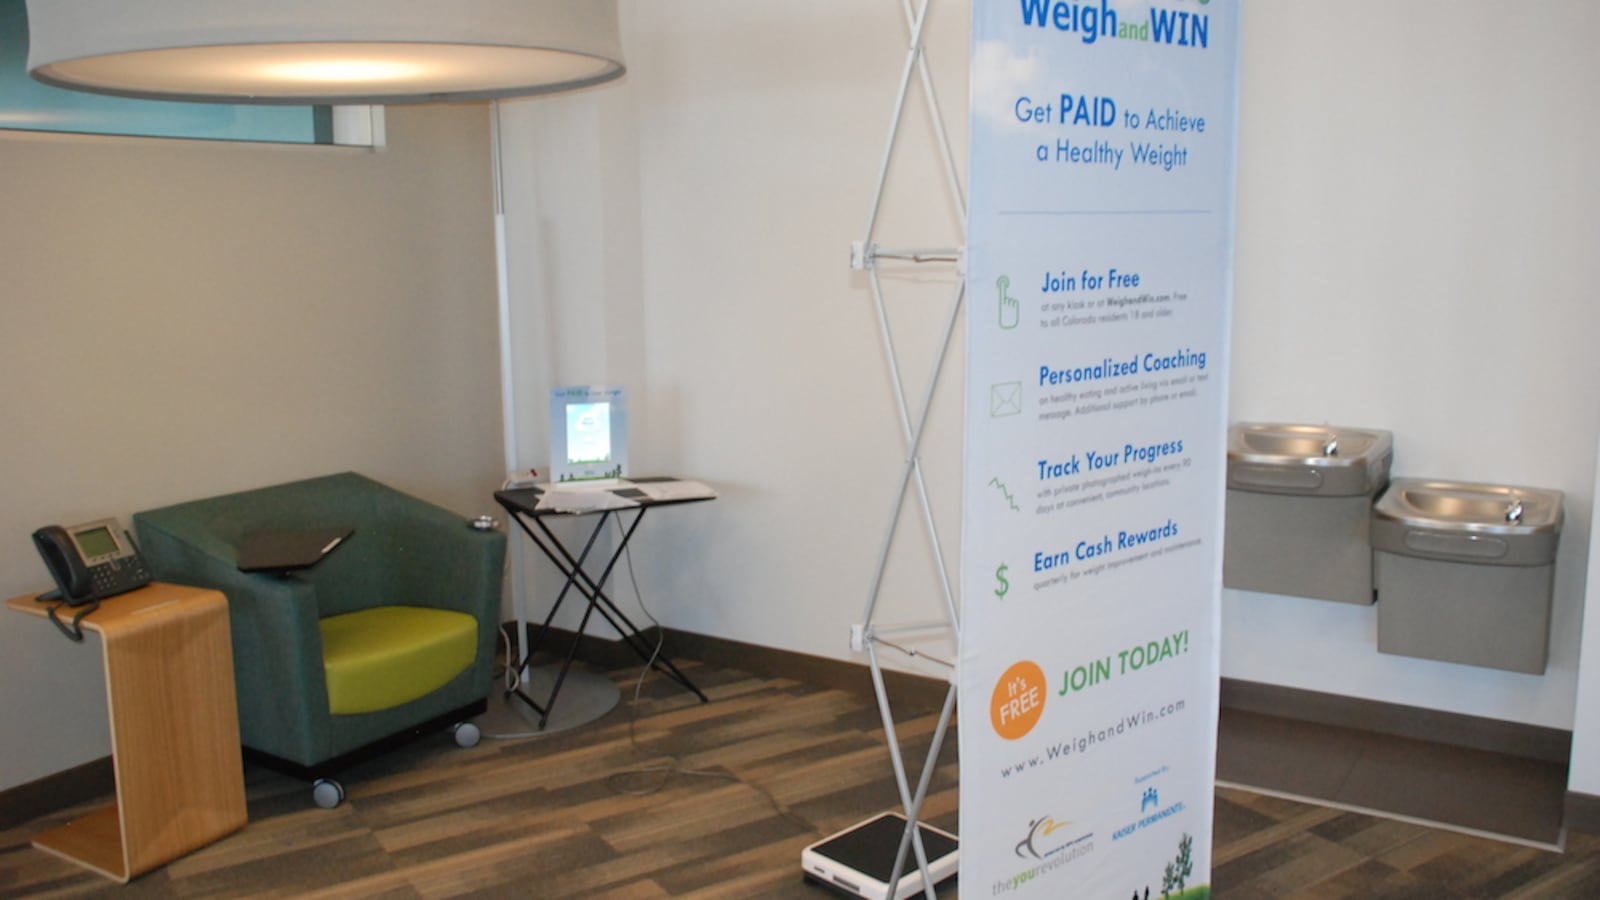 This mobile Weigh and Win kiosk moves around to different Denver Public School buildings.